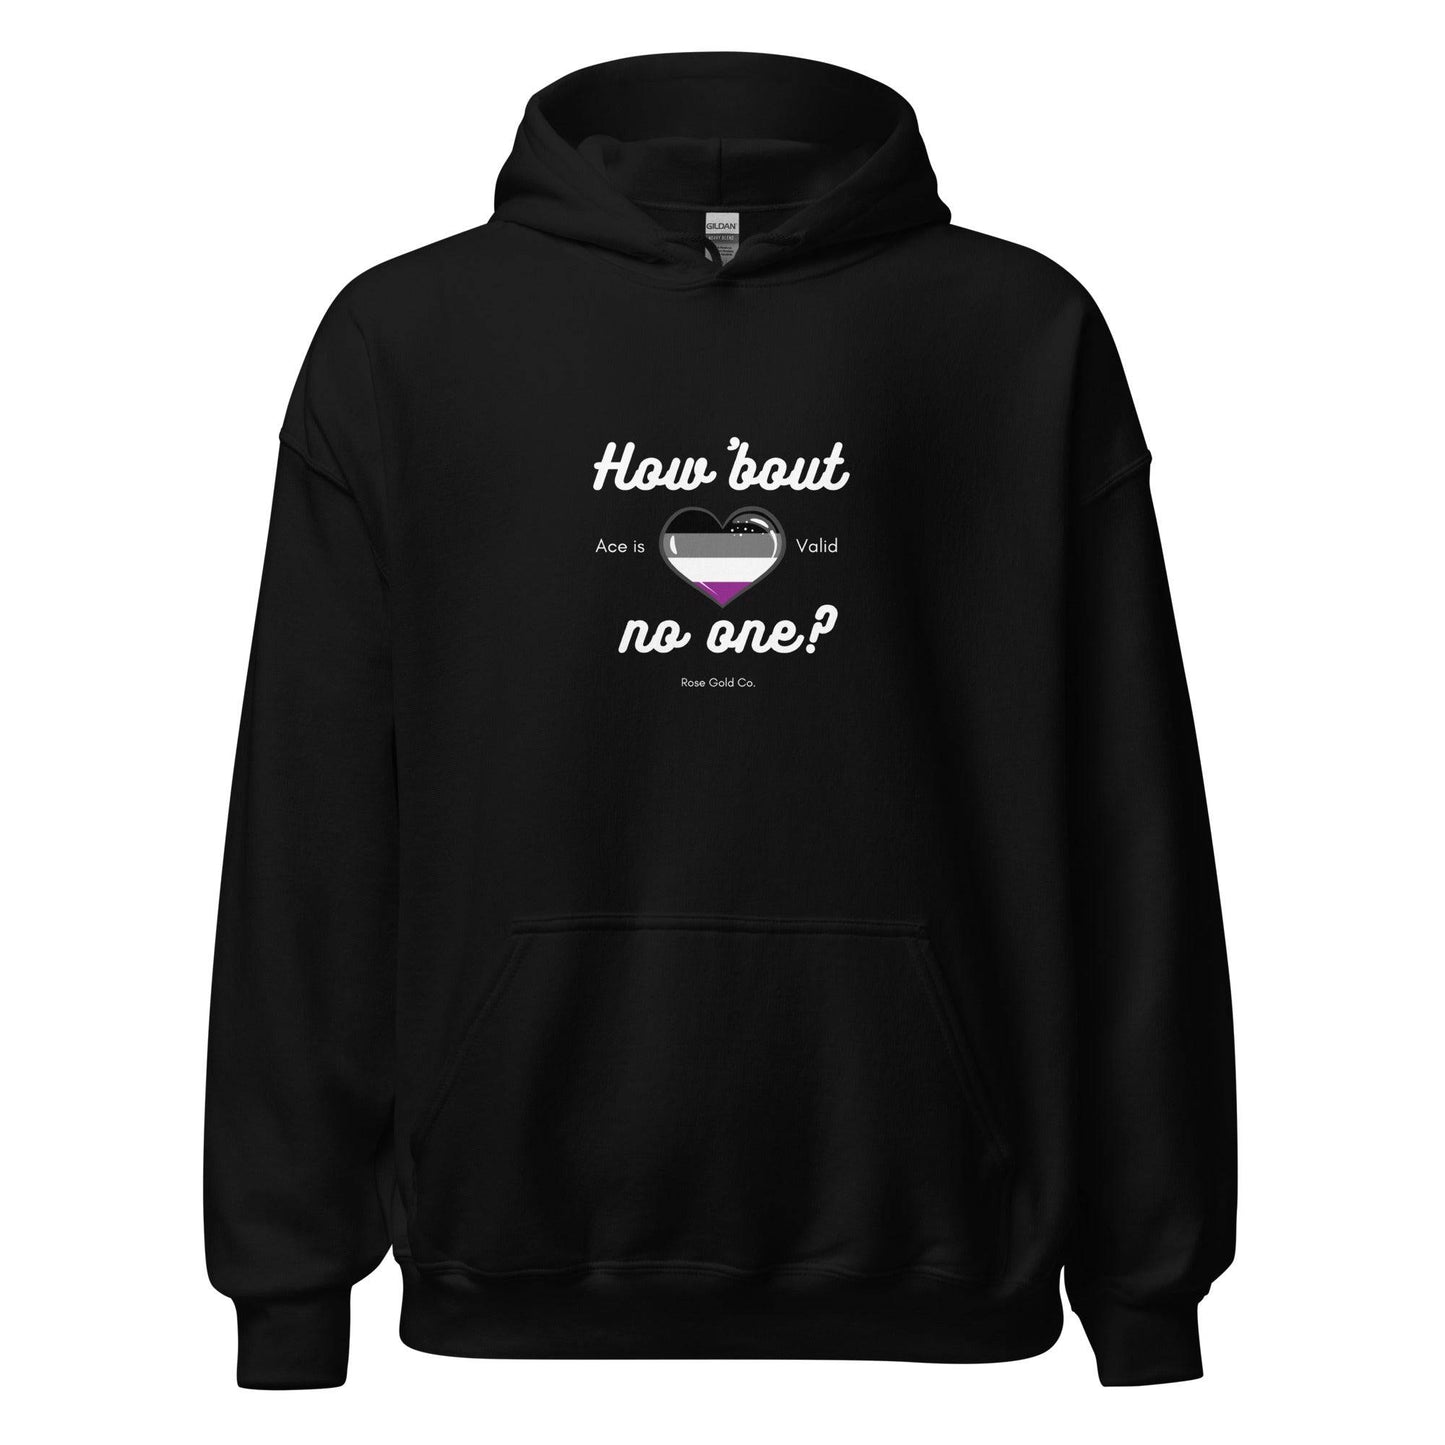 How About No One? Ace Unisex Hoodie - Rose Gold Co. Shop